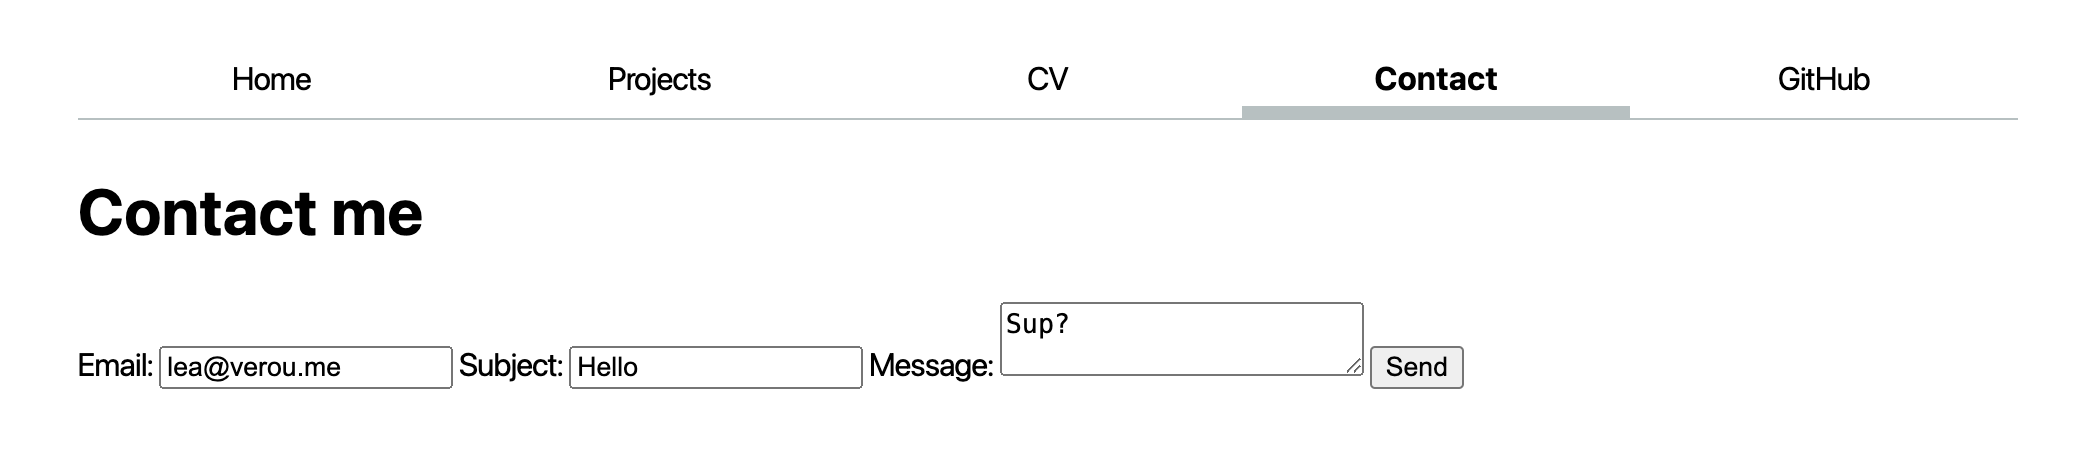 Unstyled contact form screenshot